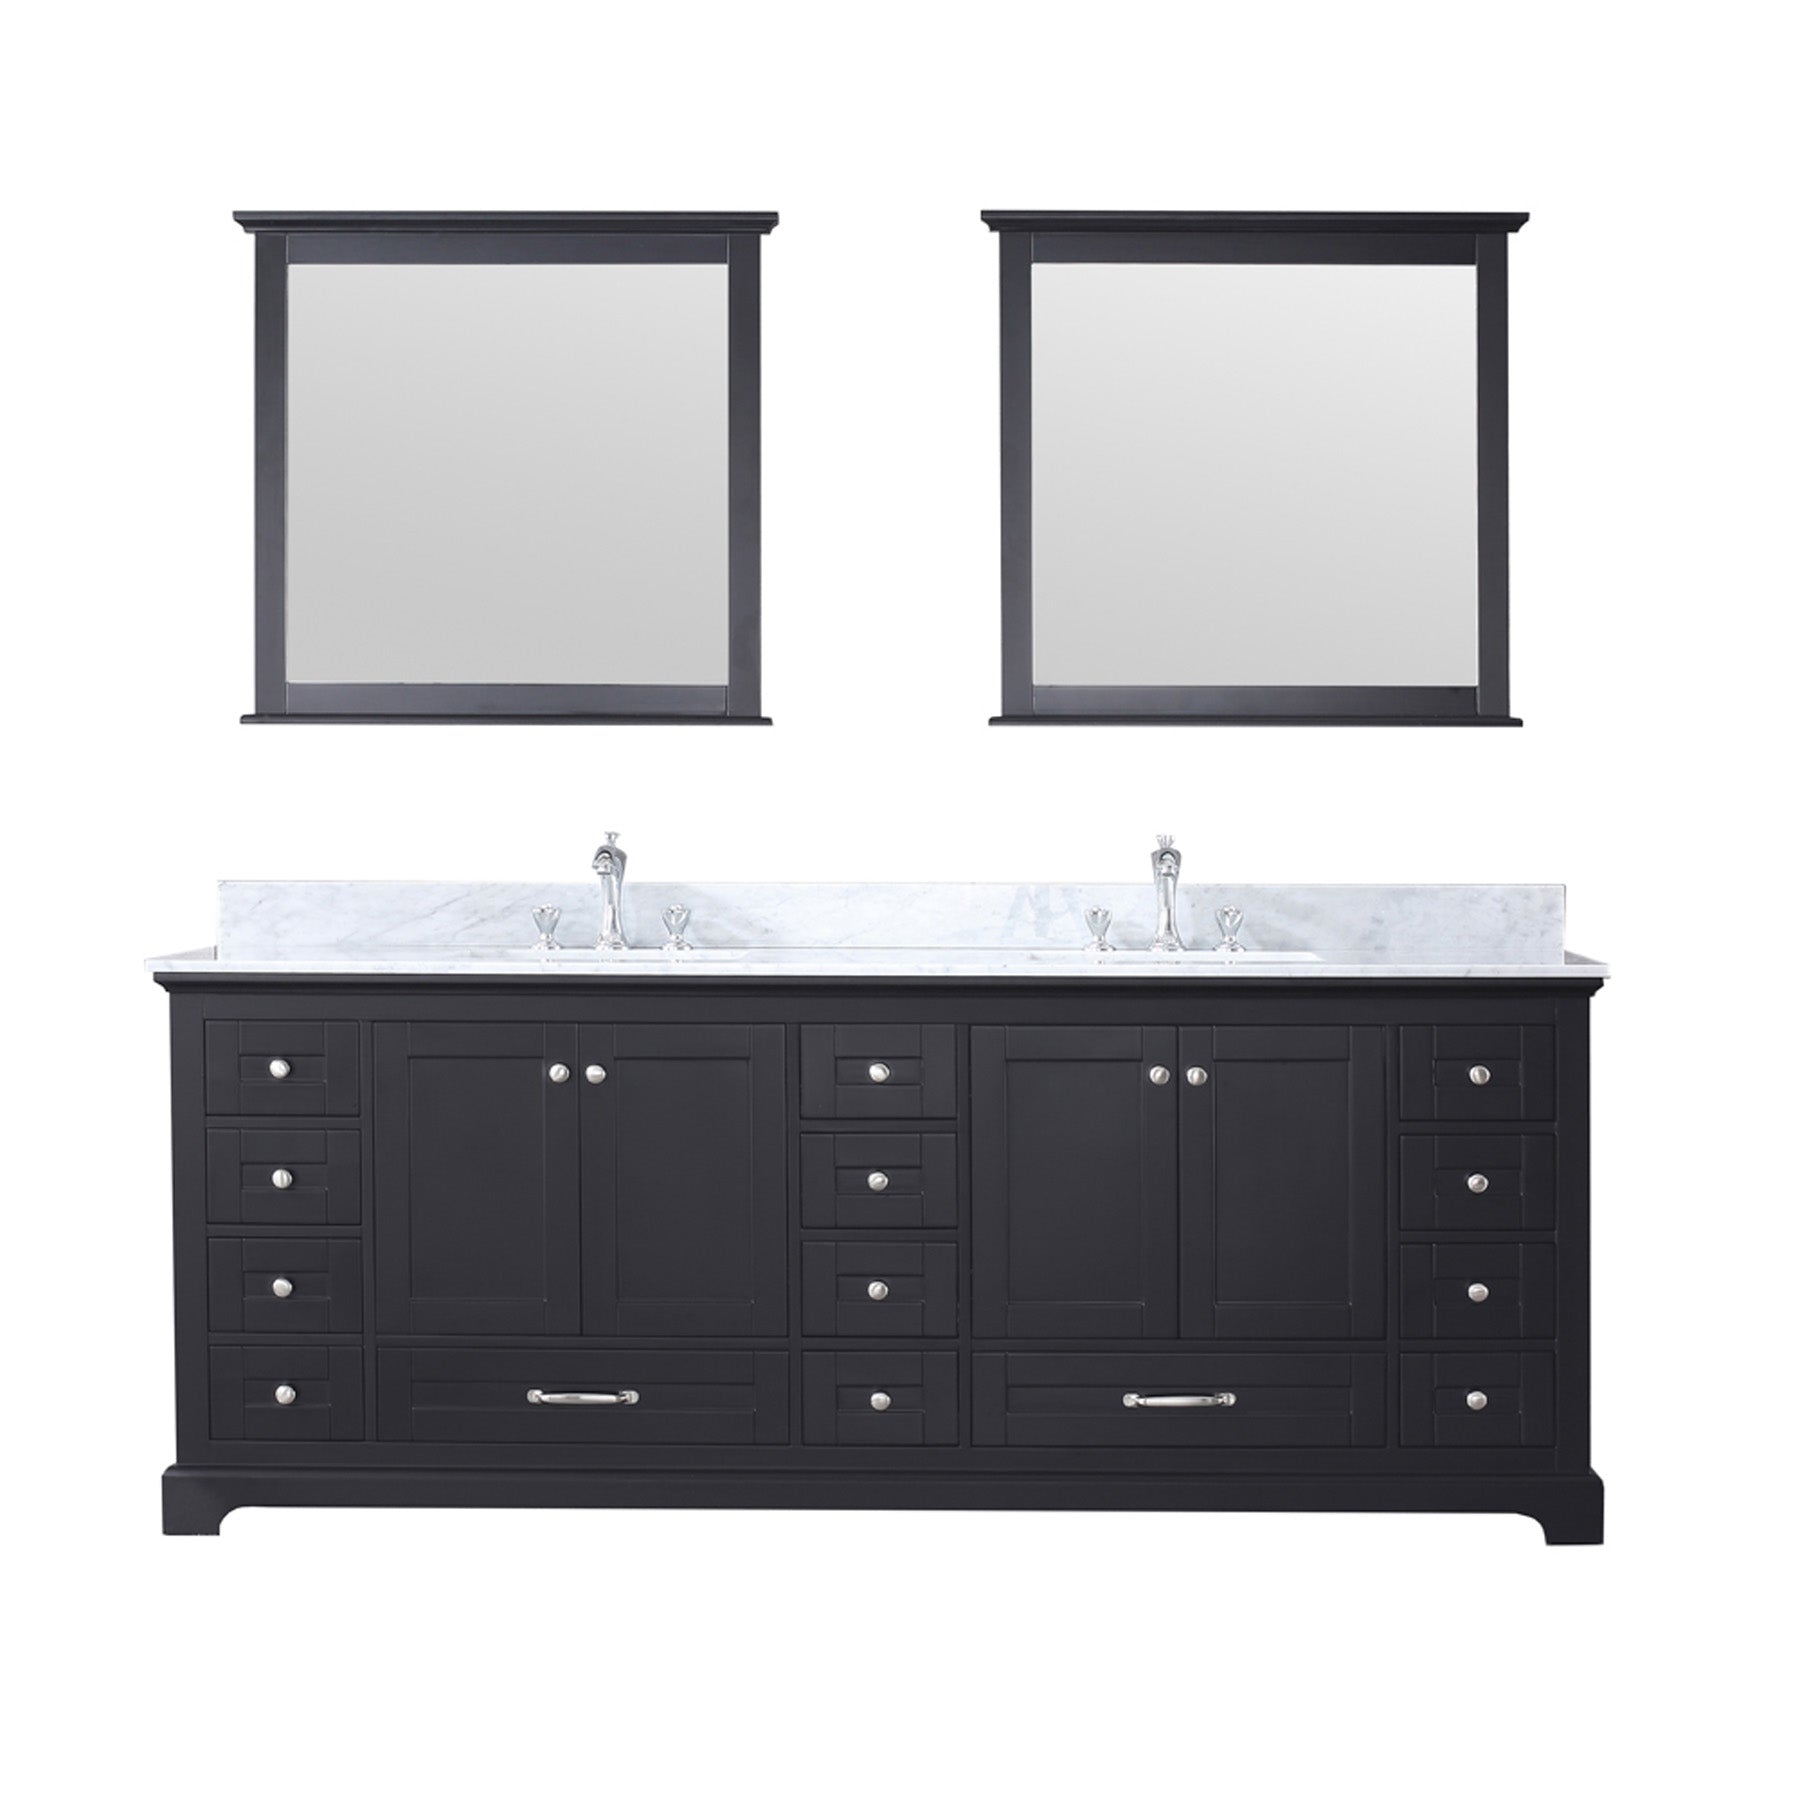 Dukes 84 In. Freestanding Espresso Bathroom Vanity With Double Undermount Ceramic Sink, White Carrara Marble Top & 34 In. Mirrors